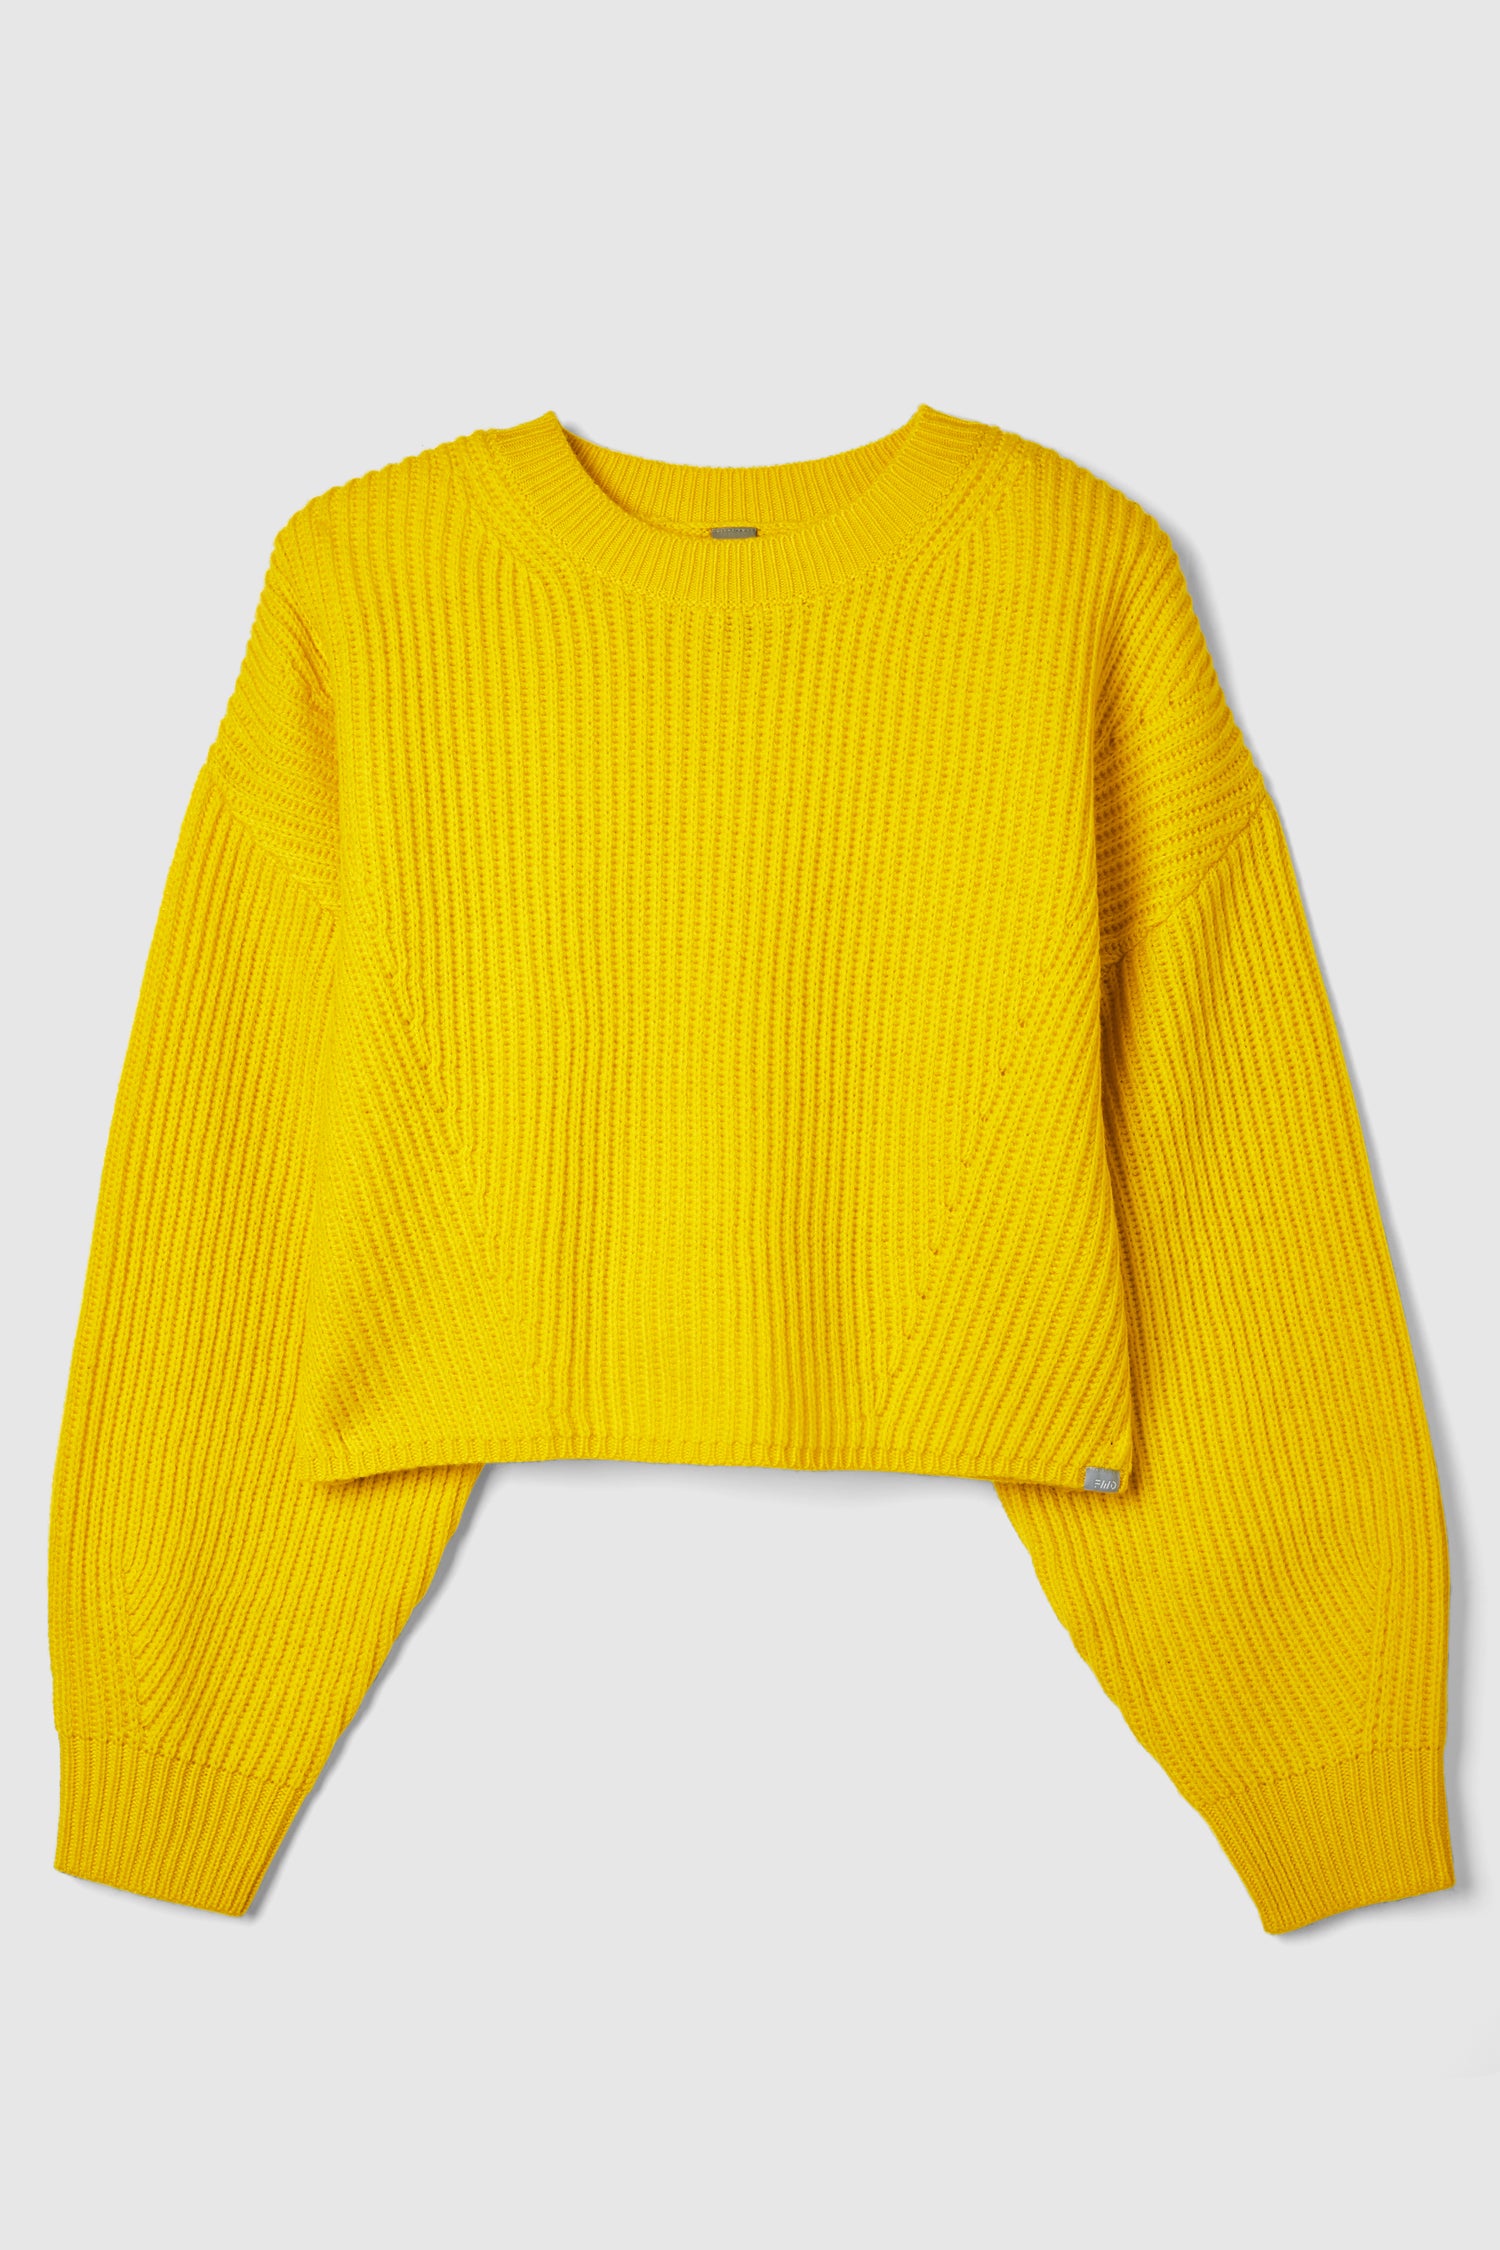 Friday FWD Women's Cropped Sweater - BEST SELLING